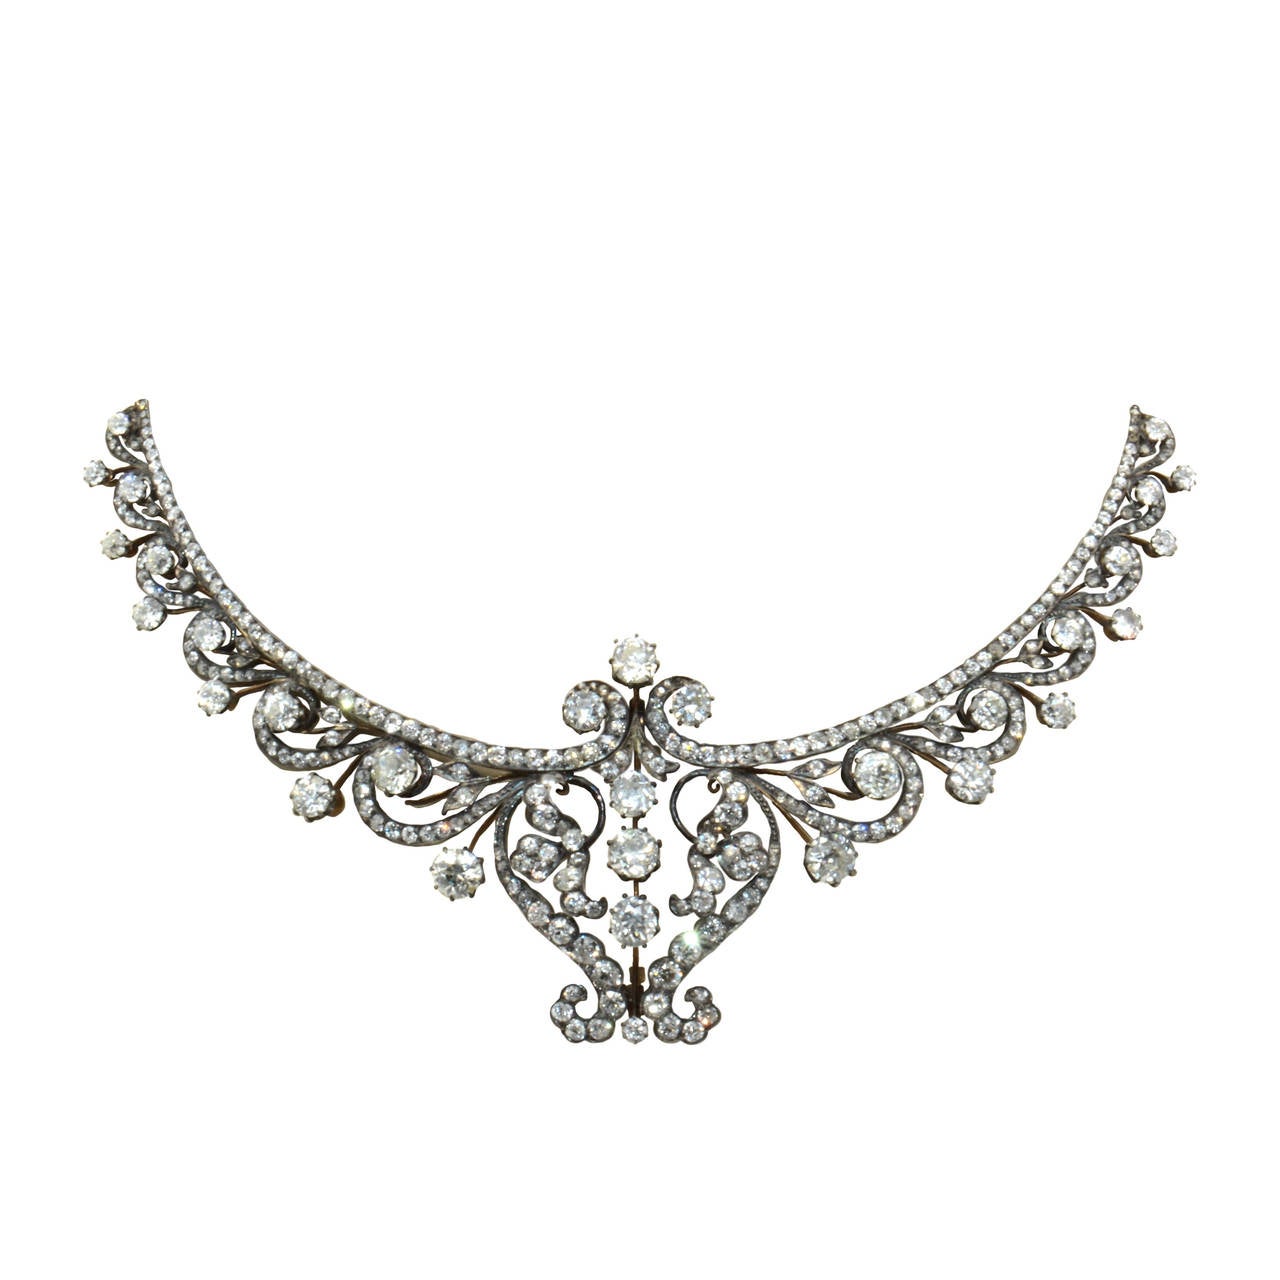 England, Victorian. Silver and silver gilt set with old cut diamonds. Used to be a tiara and transformed into a necklace. The added part from a later date. For more detailed information, please contact Massoni.